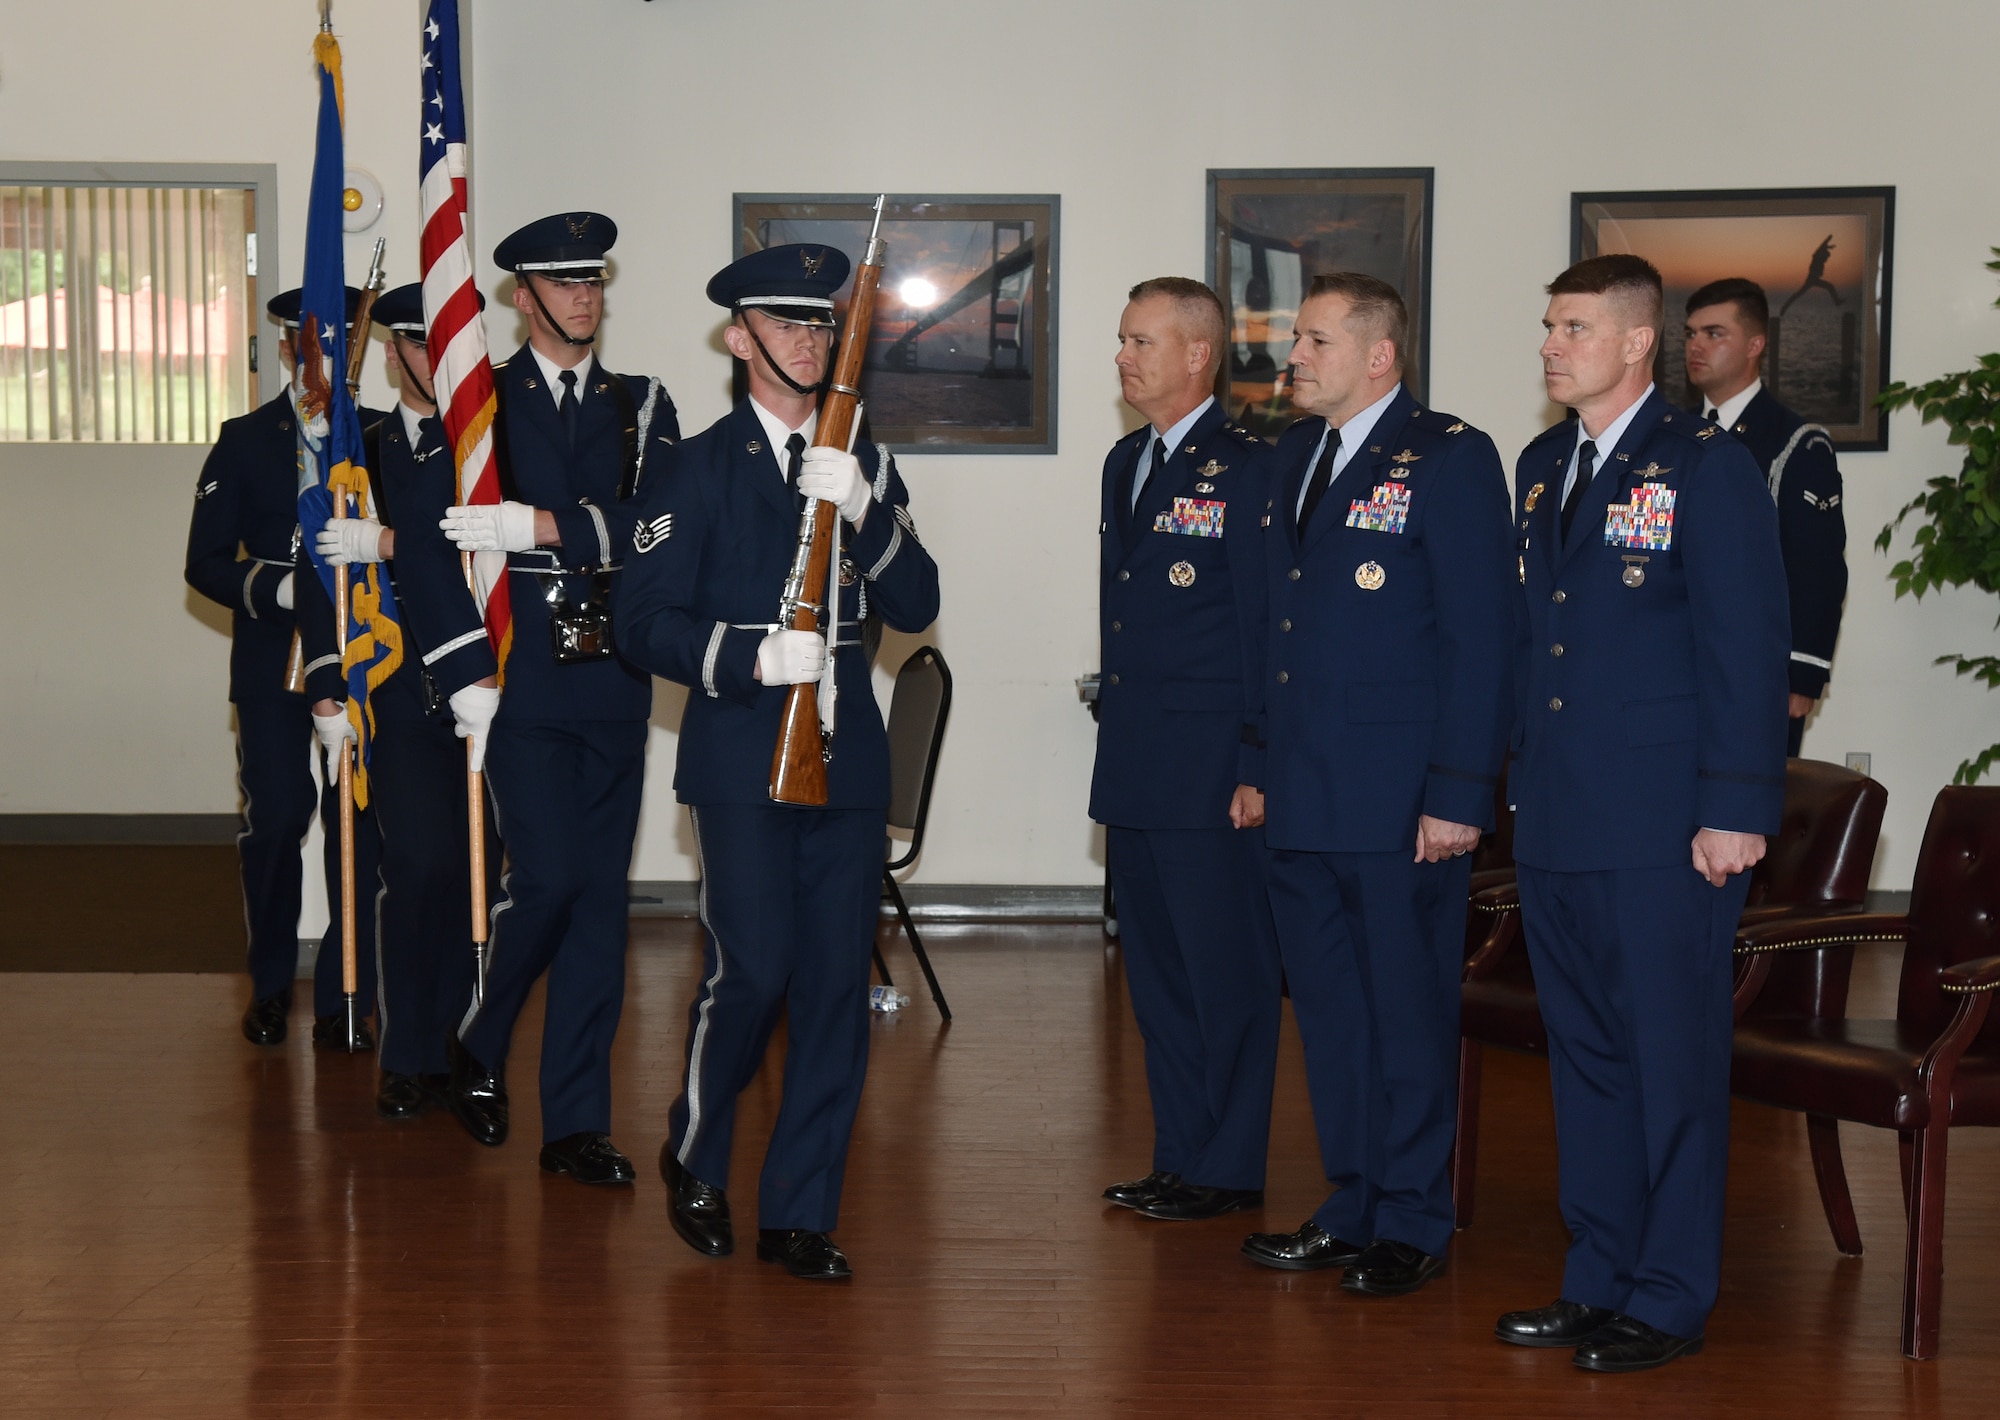 Col. Michael A. Sinks accepted command of the 844th Communications Group from Col. Rocky A. Favorito during a change-of-command ceremony June 28 on Joint Base Andrews, Maryland.